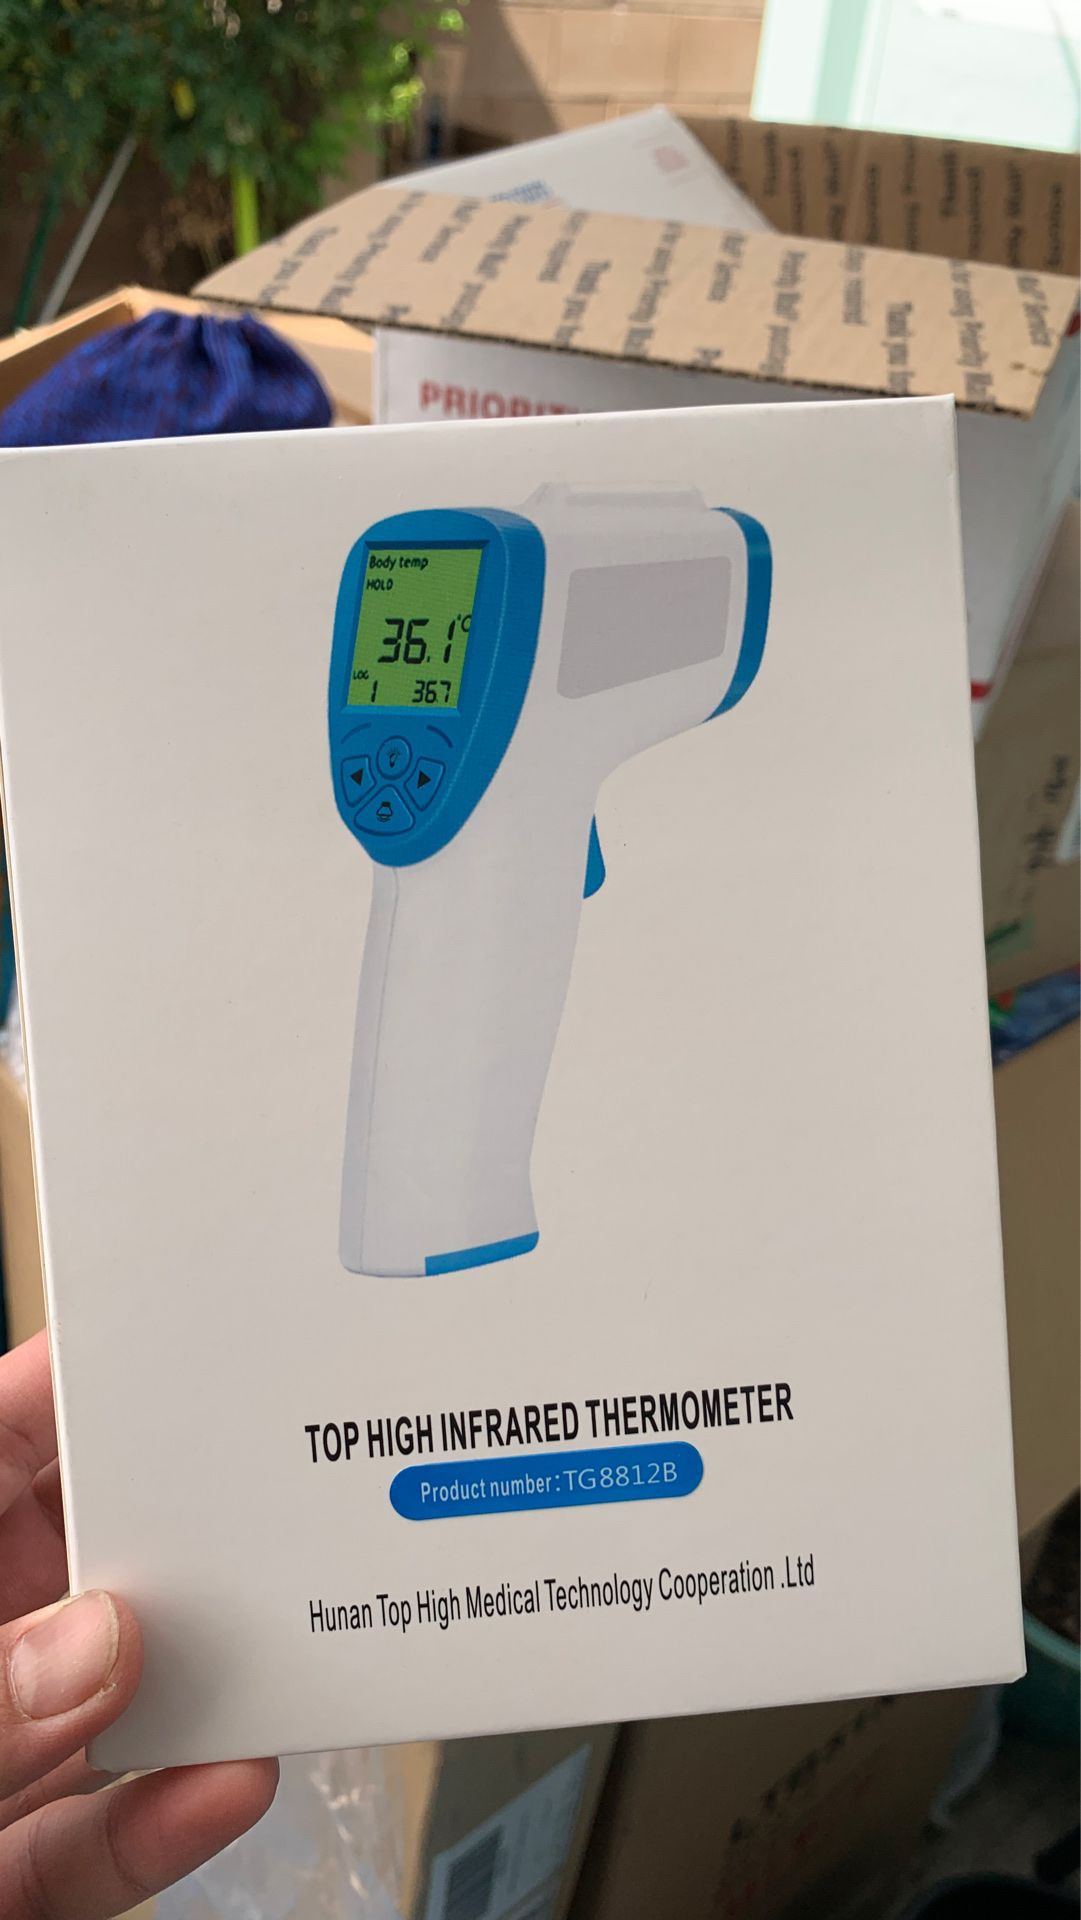 Brand new forehead thermometer $30